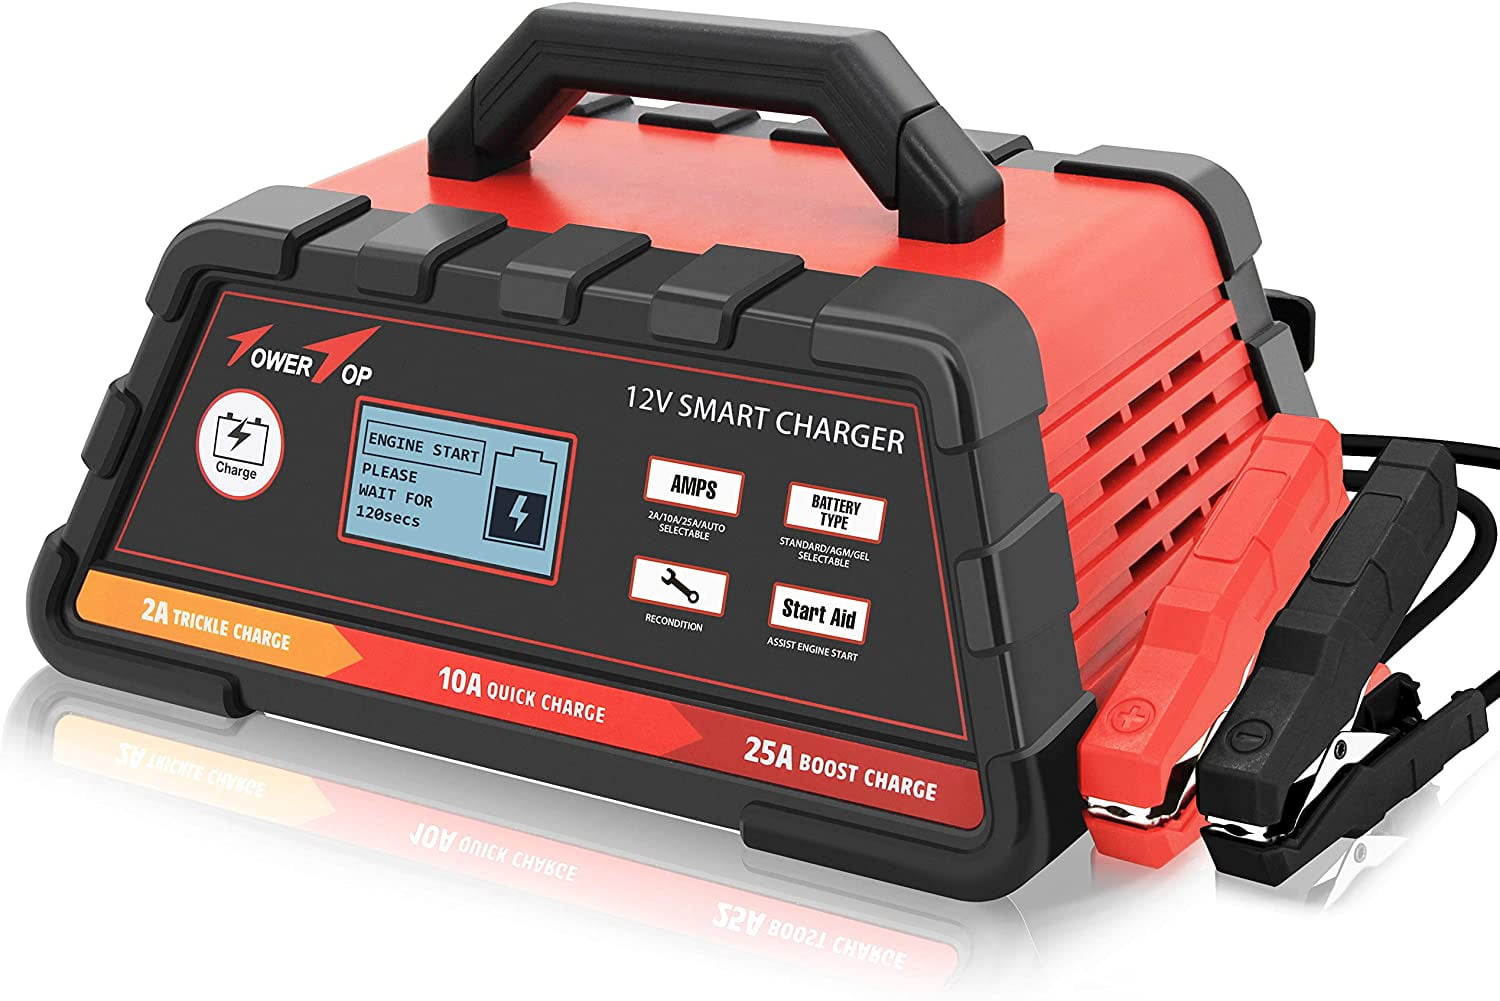 Towertop 12V 2/10/25A Smart Battery Charger/Maintainer Fully Automatic with  Engine Start, Cable Clamps